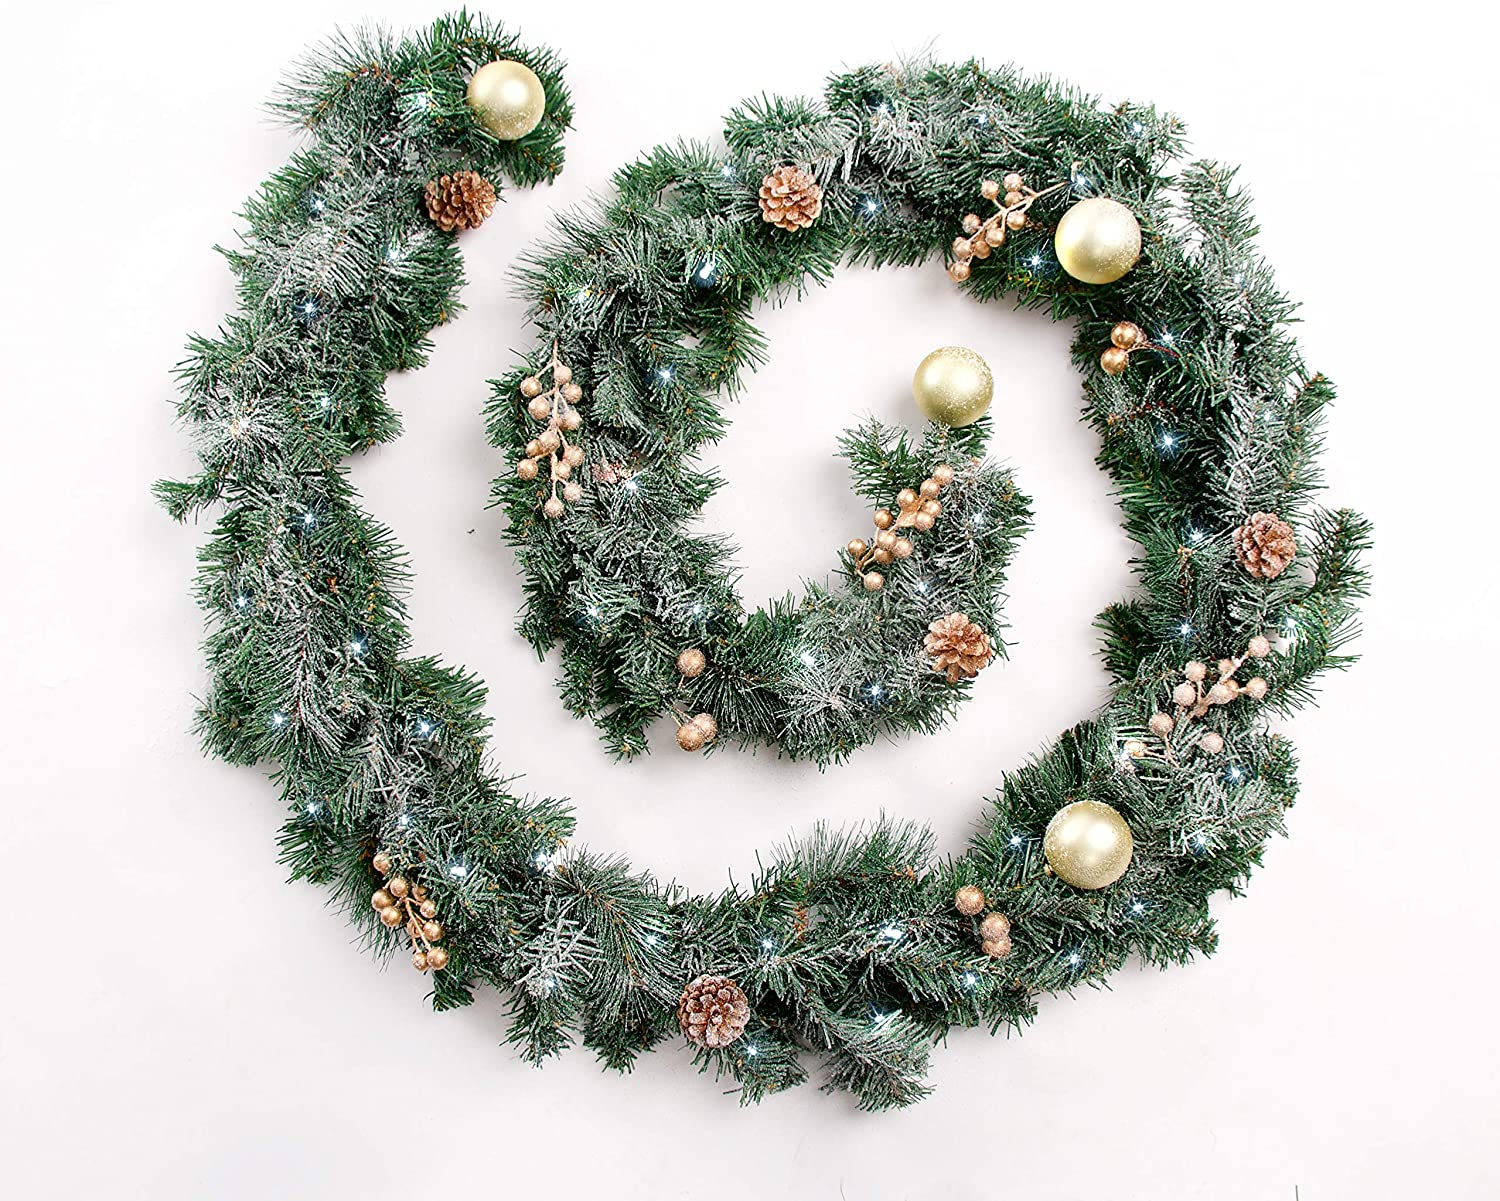 6ft - 9ft or 12ft Frosted Gold Christmas Garland - Optional Lights